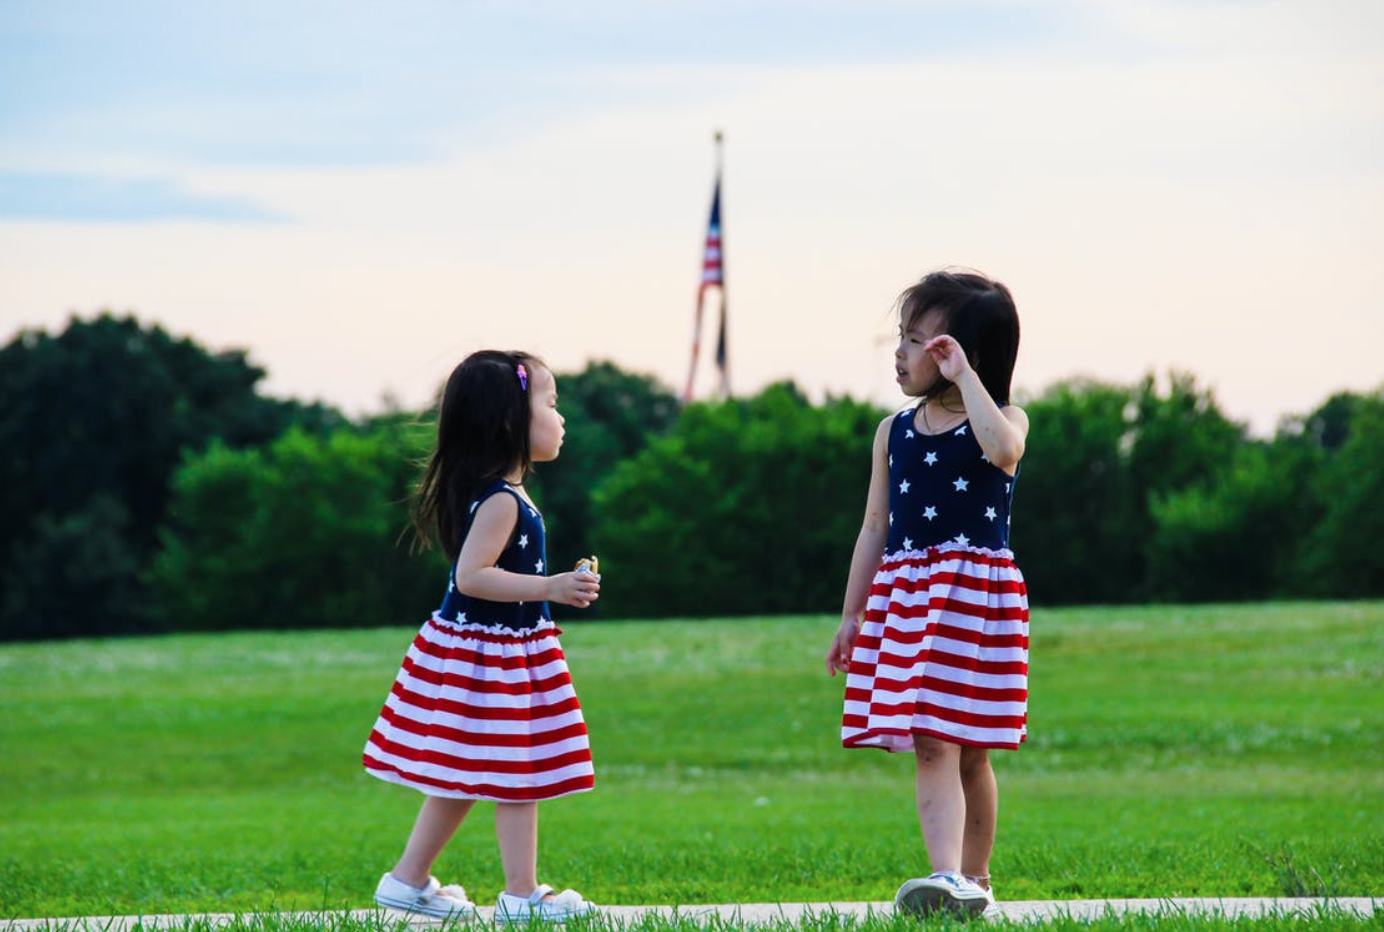 Little girls in American flag dresses standing on the lawn; image by Ahmet Bozkuş, via Pexels.com.